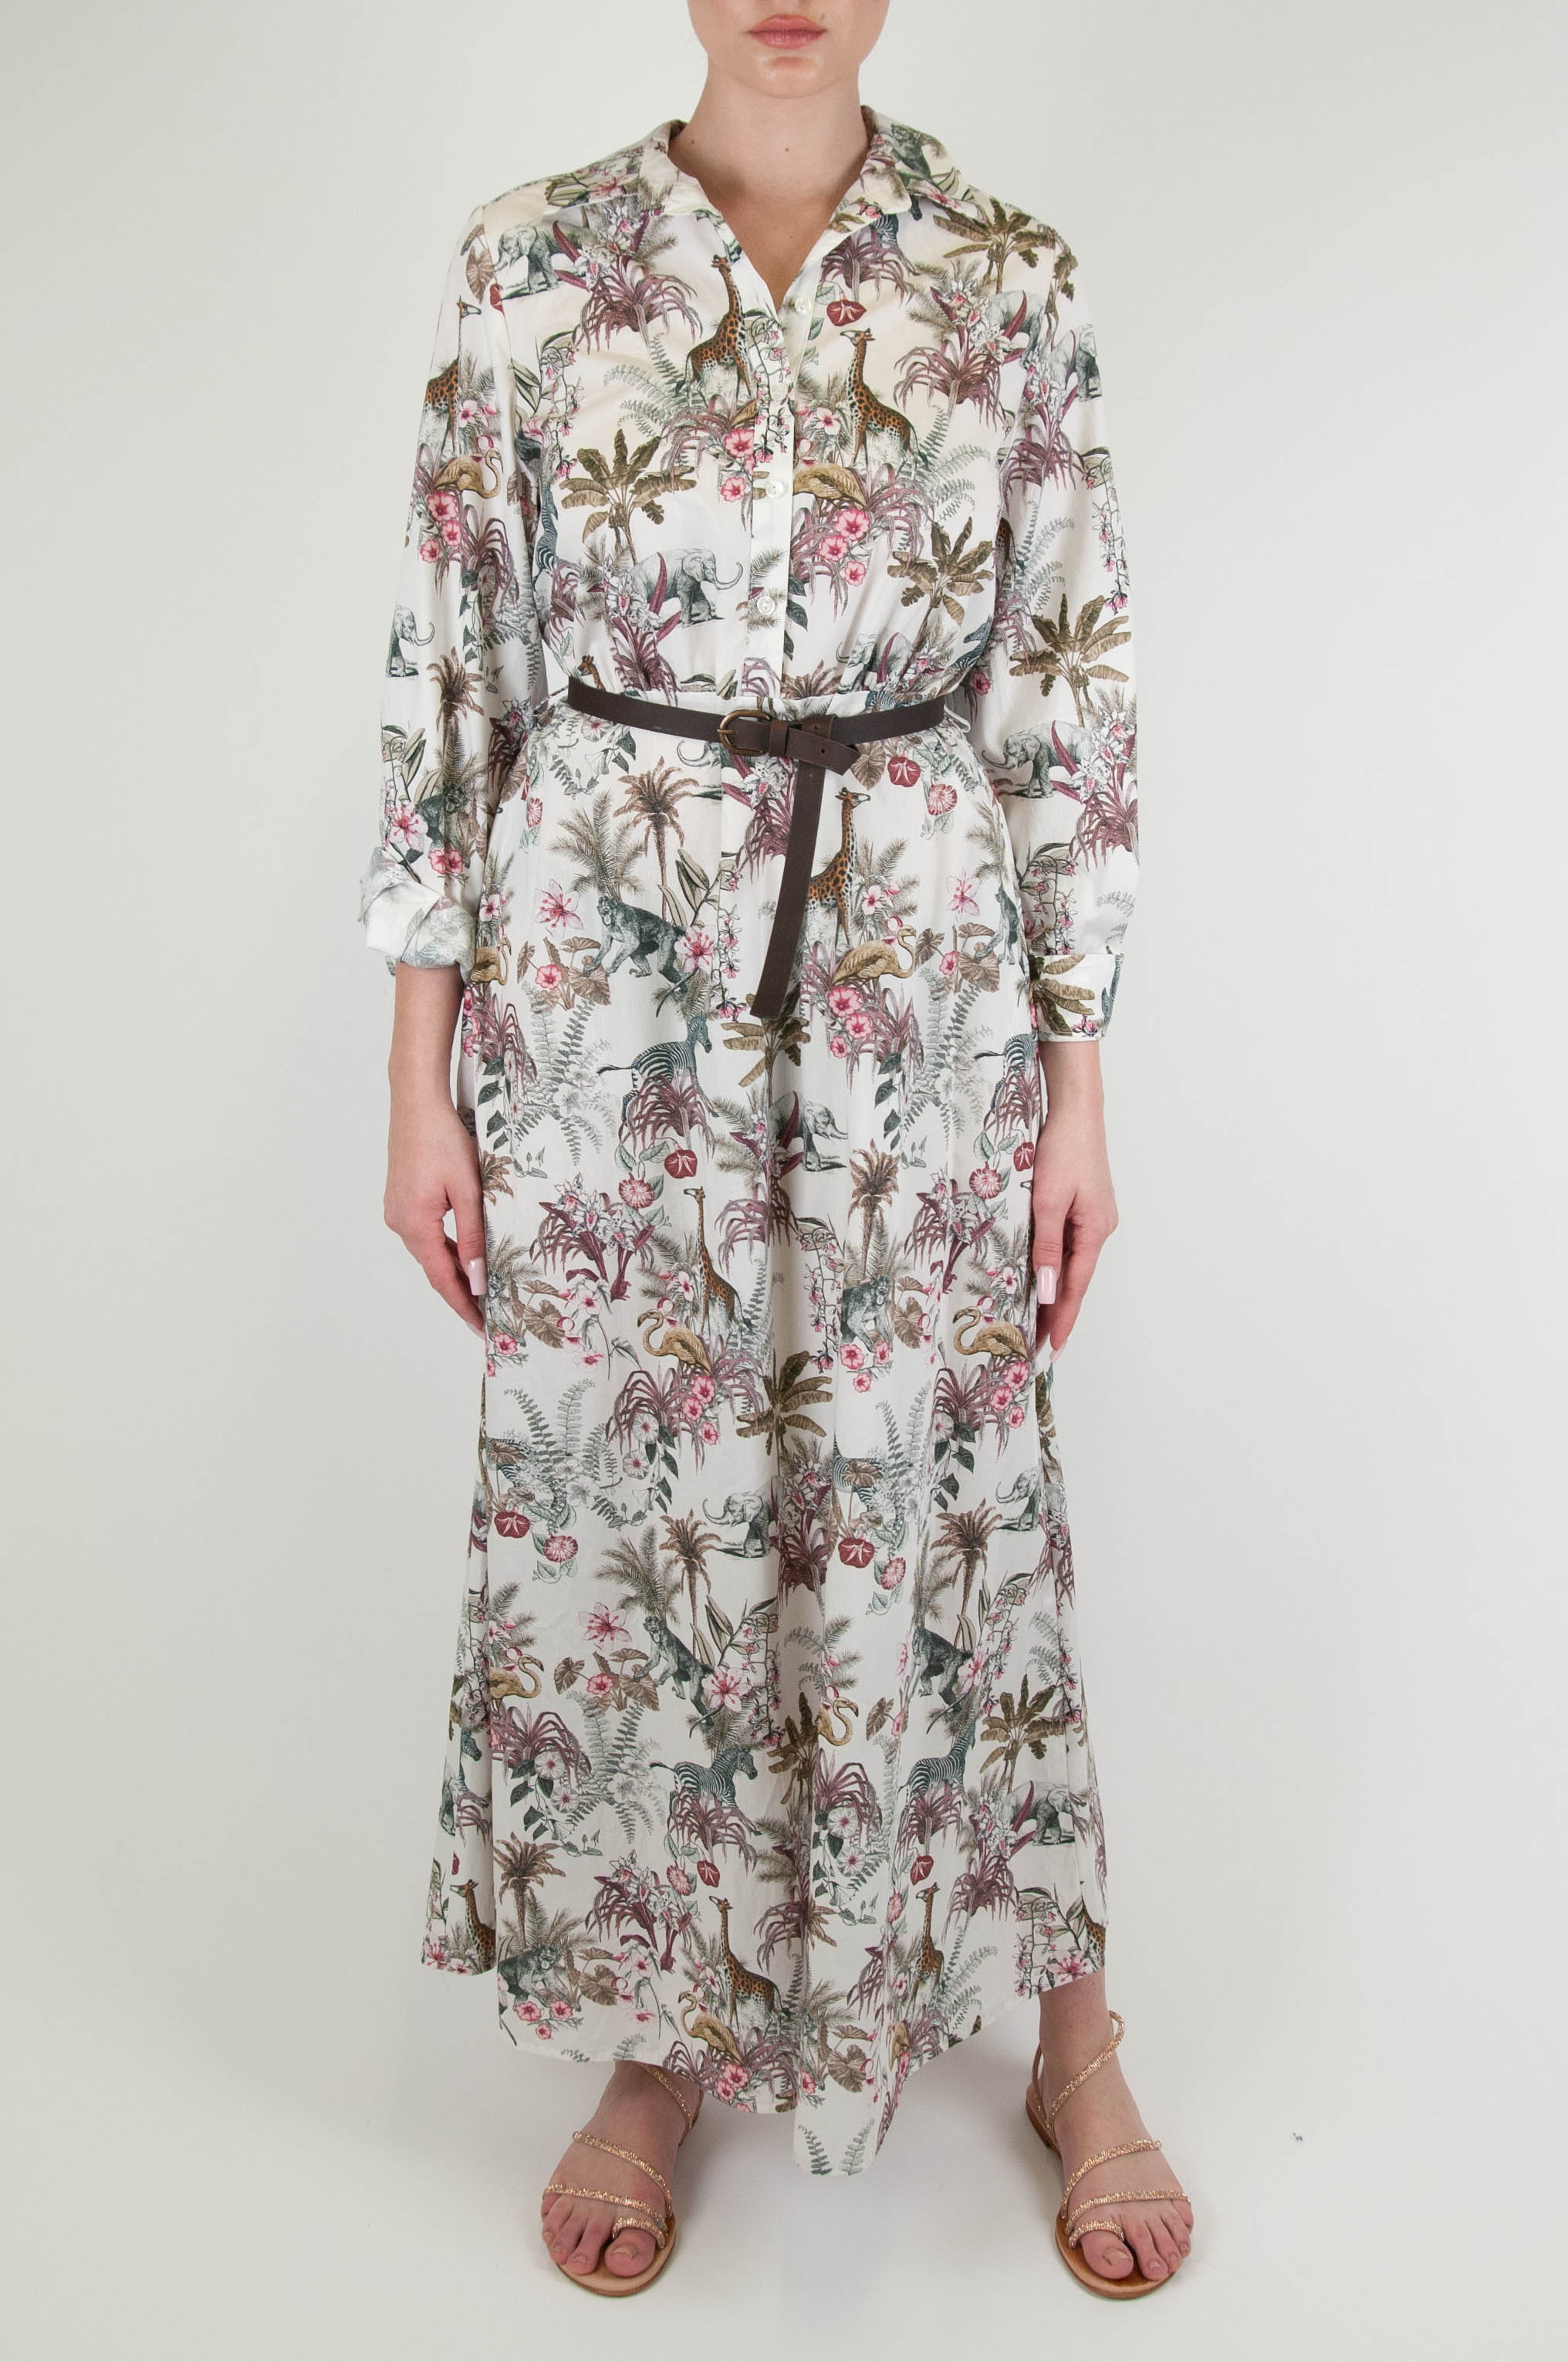 Tension in - Floral patterned shirtdress